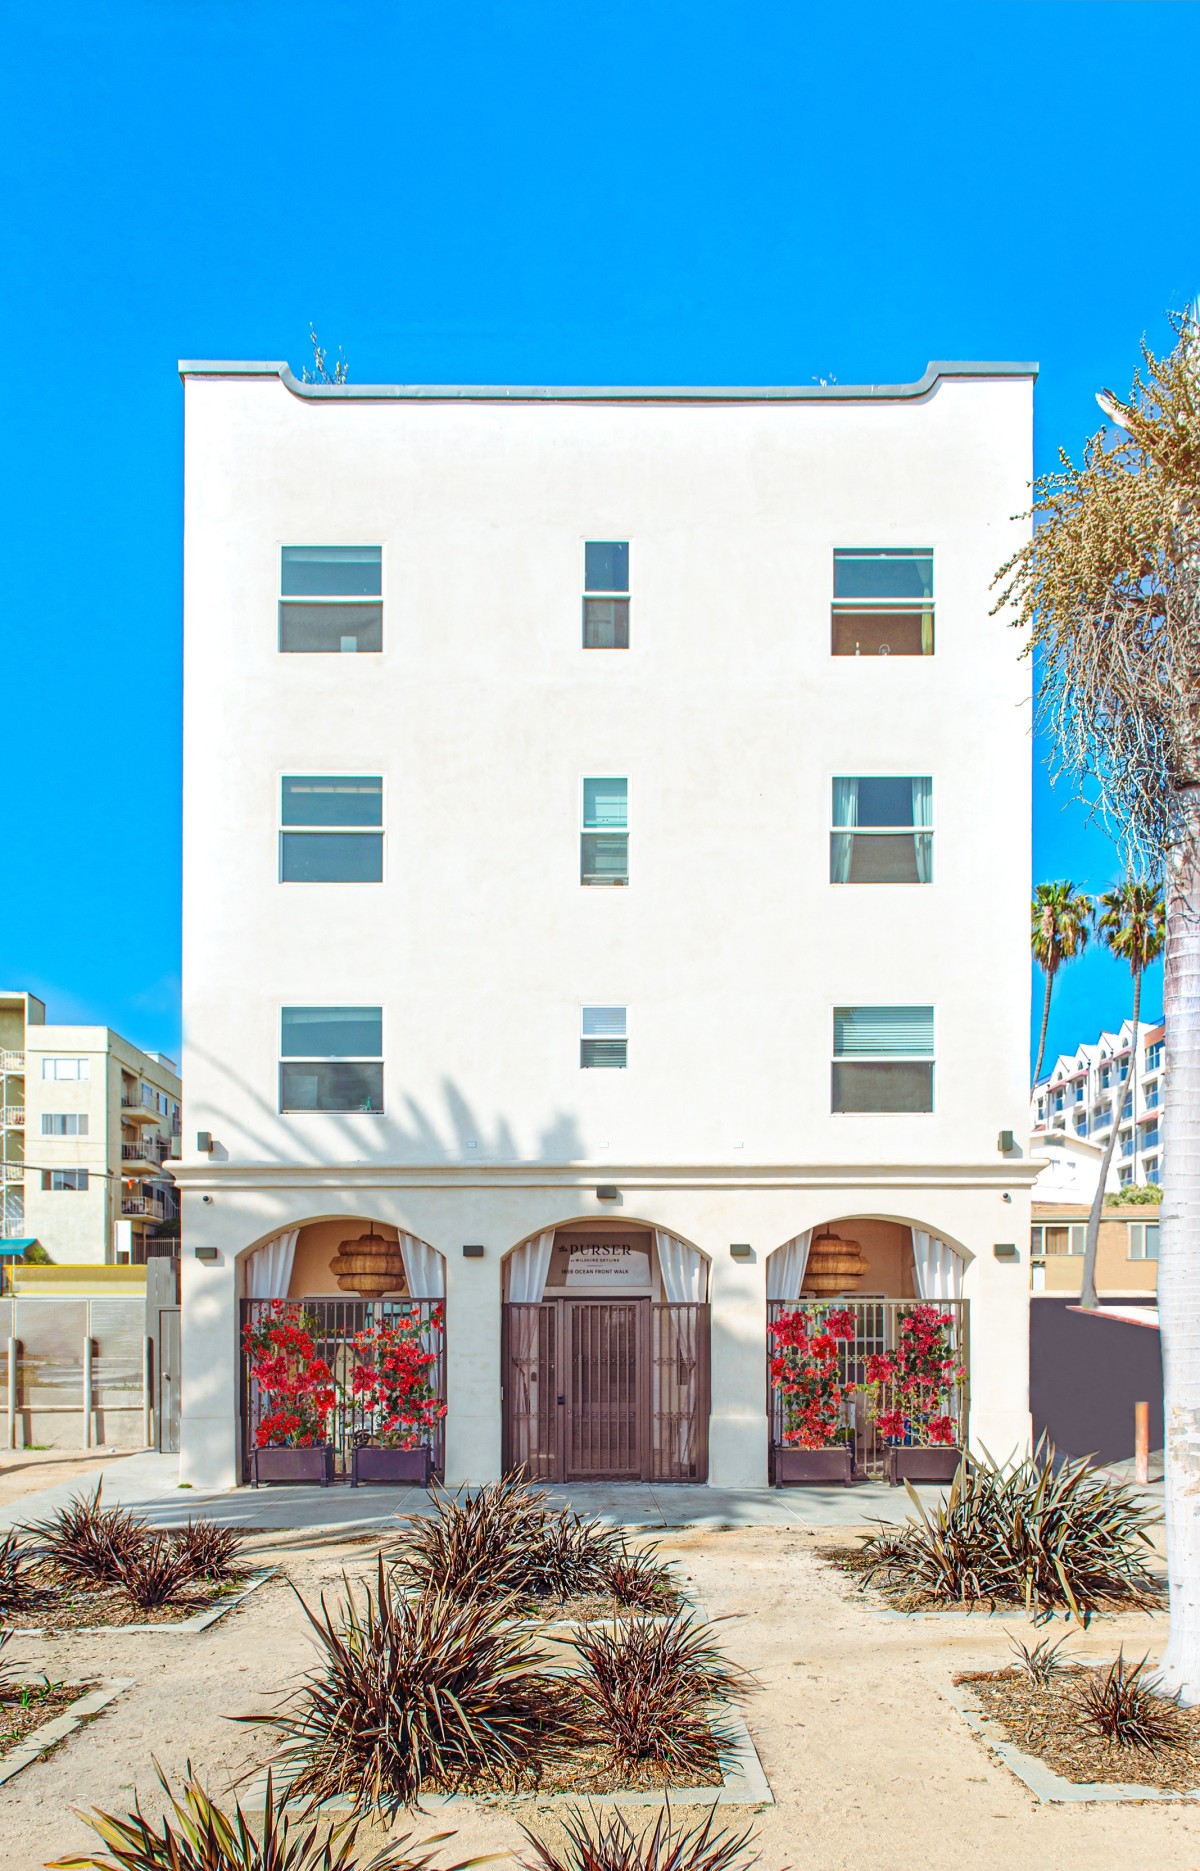 The Purser Apartment building was constructed in 1913 and reflects a vernacular
architectural style. This 30-unit building was designated a Santa Monica City Landmark in 2017 based on its significance as one of the last remaining apartment buildings that exemplified residential development, the *Seaside Terrace Tract*, along Santa Monica beachfront from the early 20th century.